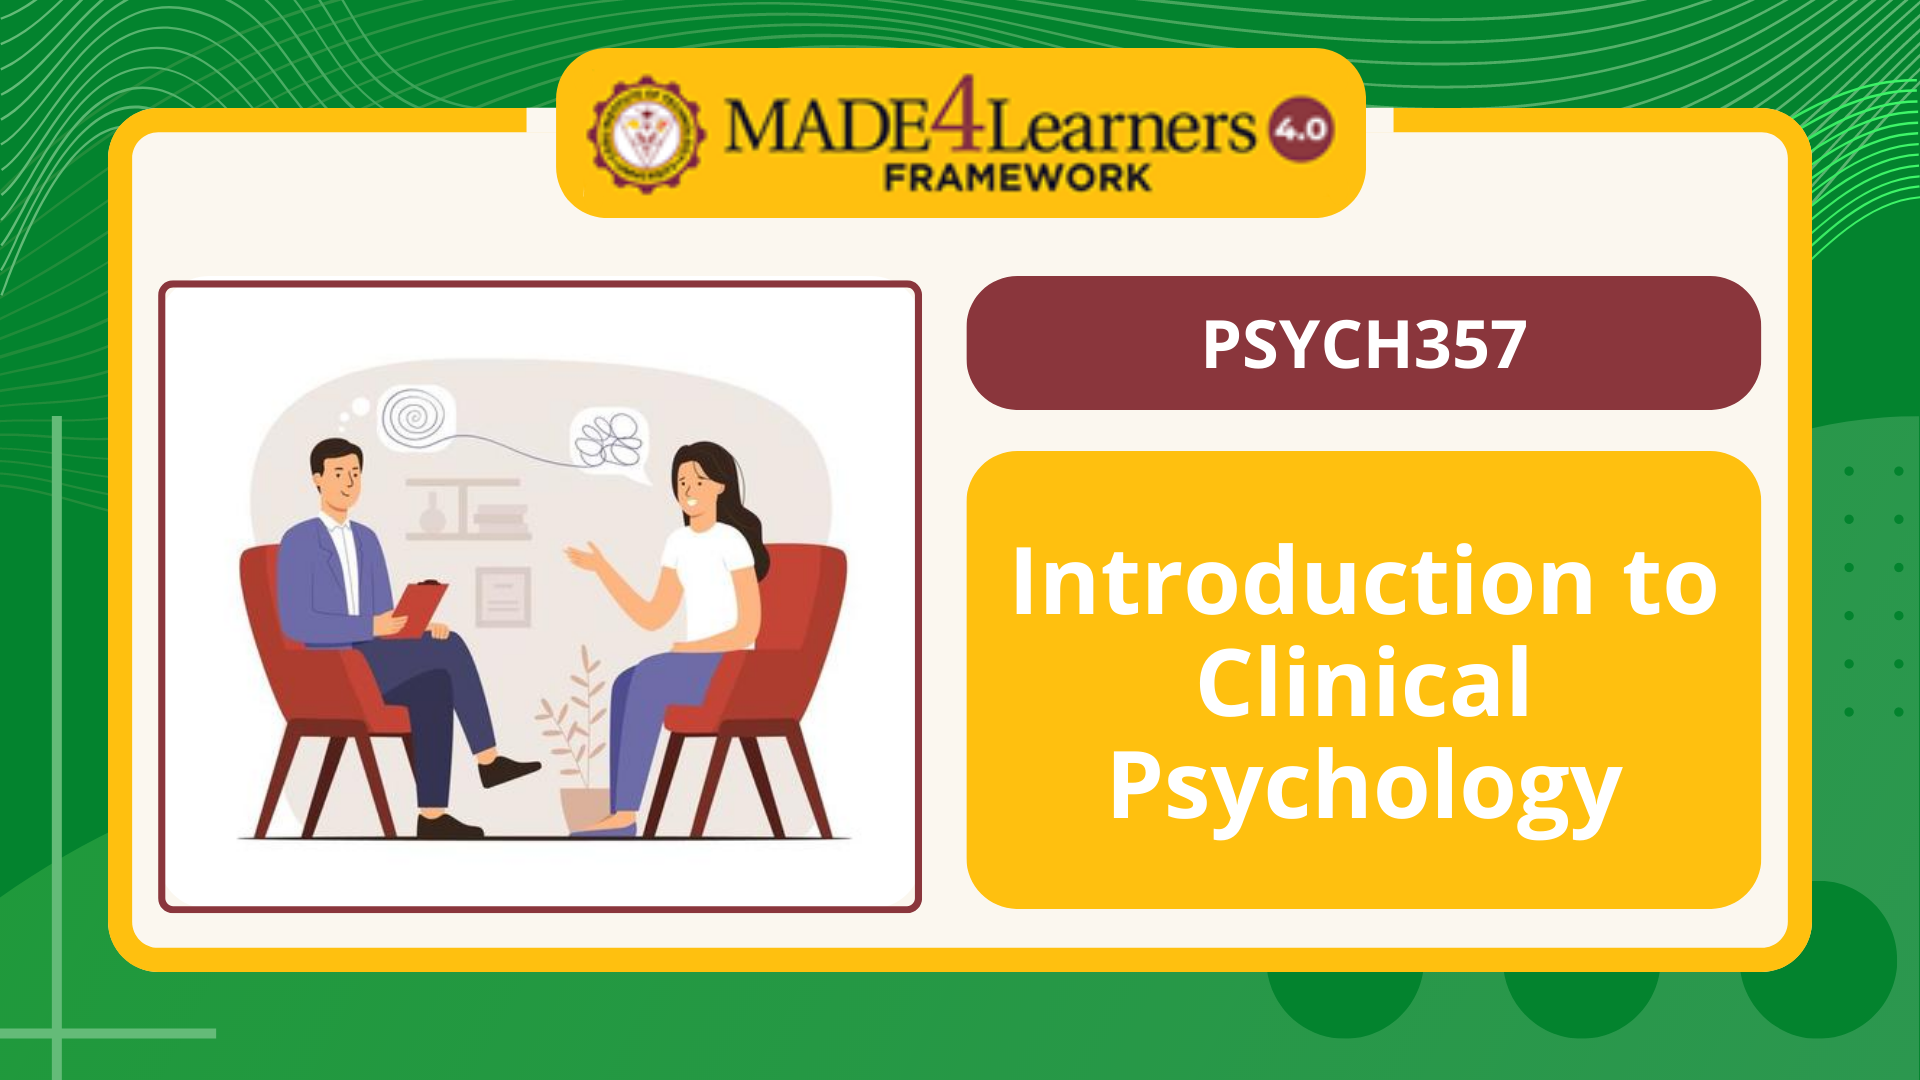 PSYCH357 Introduction to Clinical Psychology - E4.C1